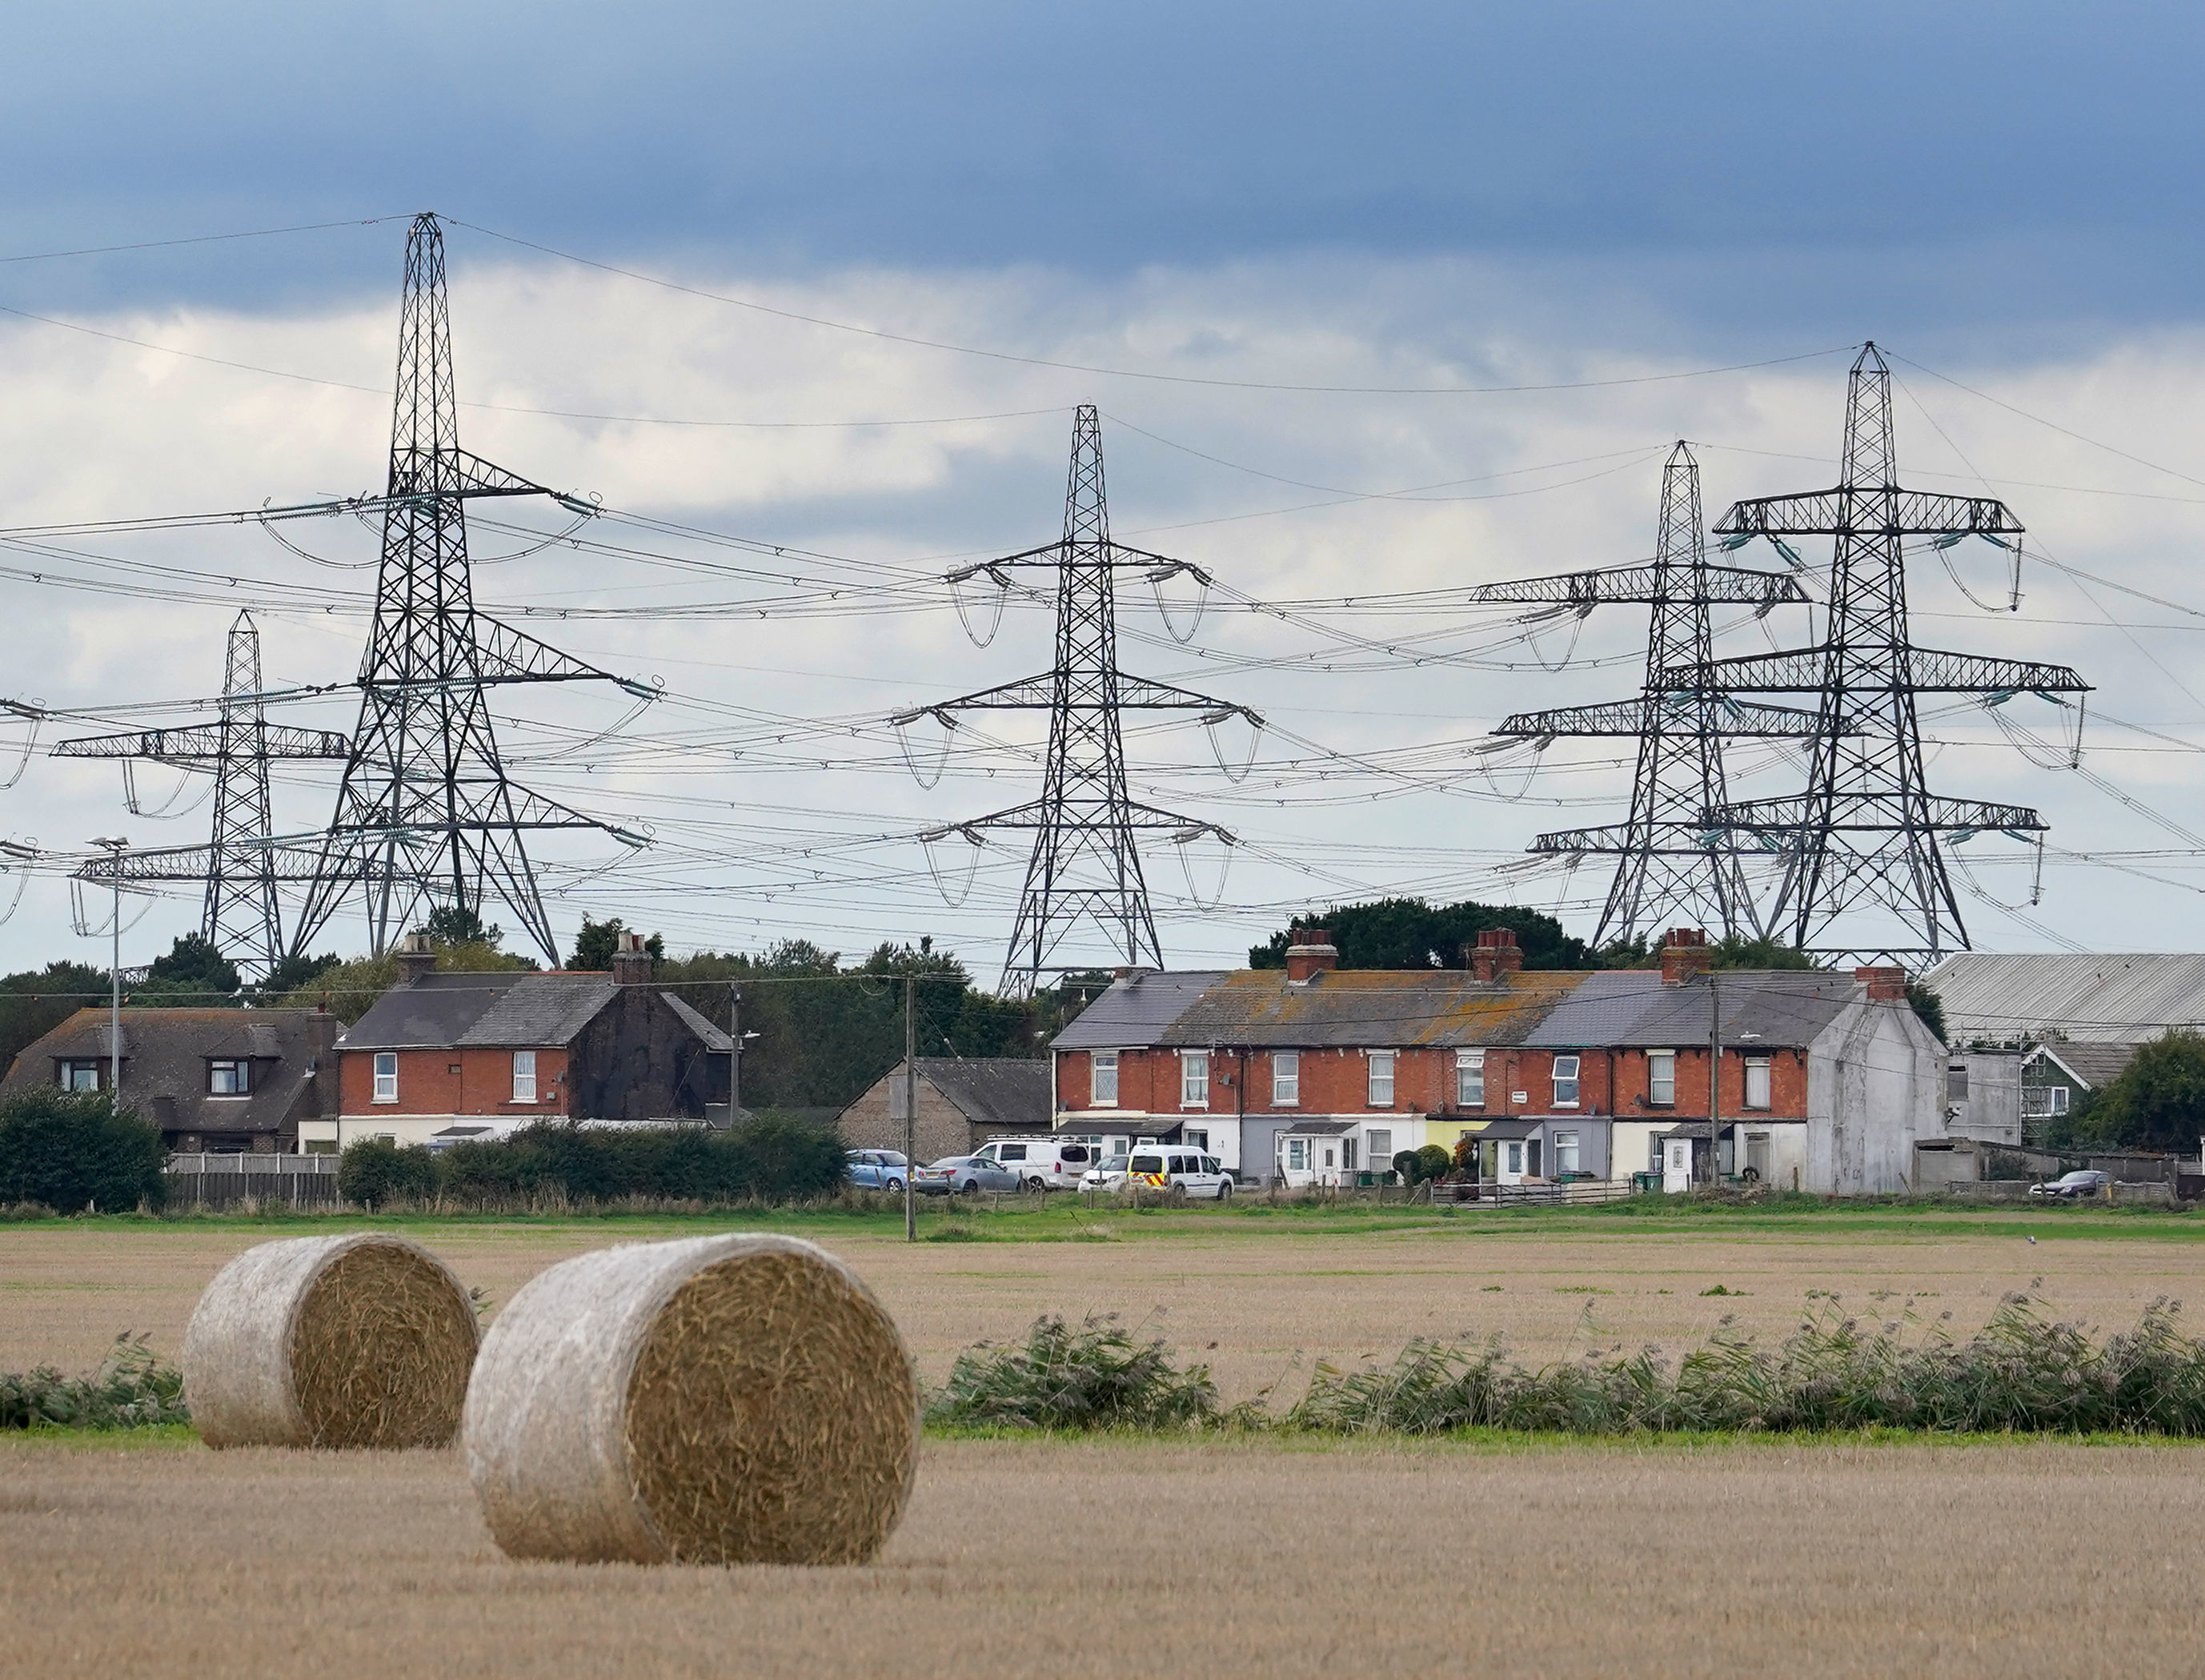 Brits who live near new pylons and electricity substations could receive up to £10,000 off their bills